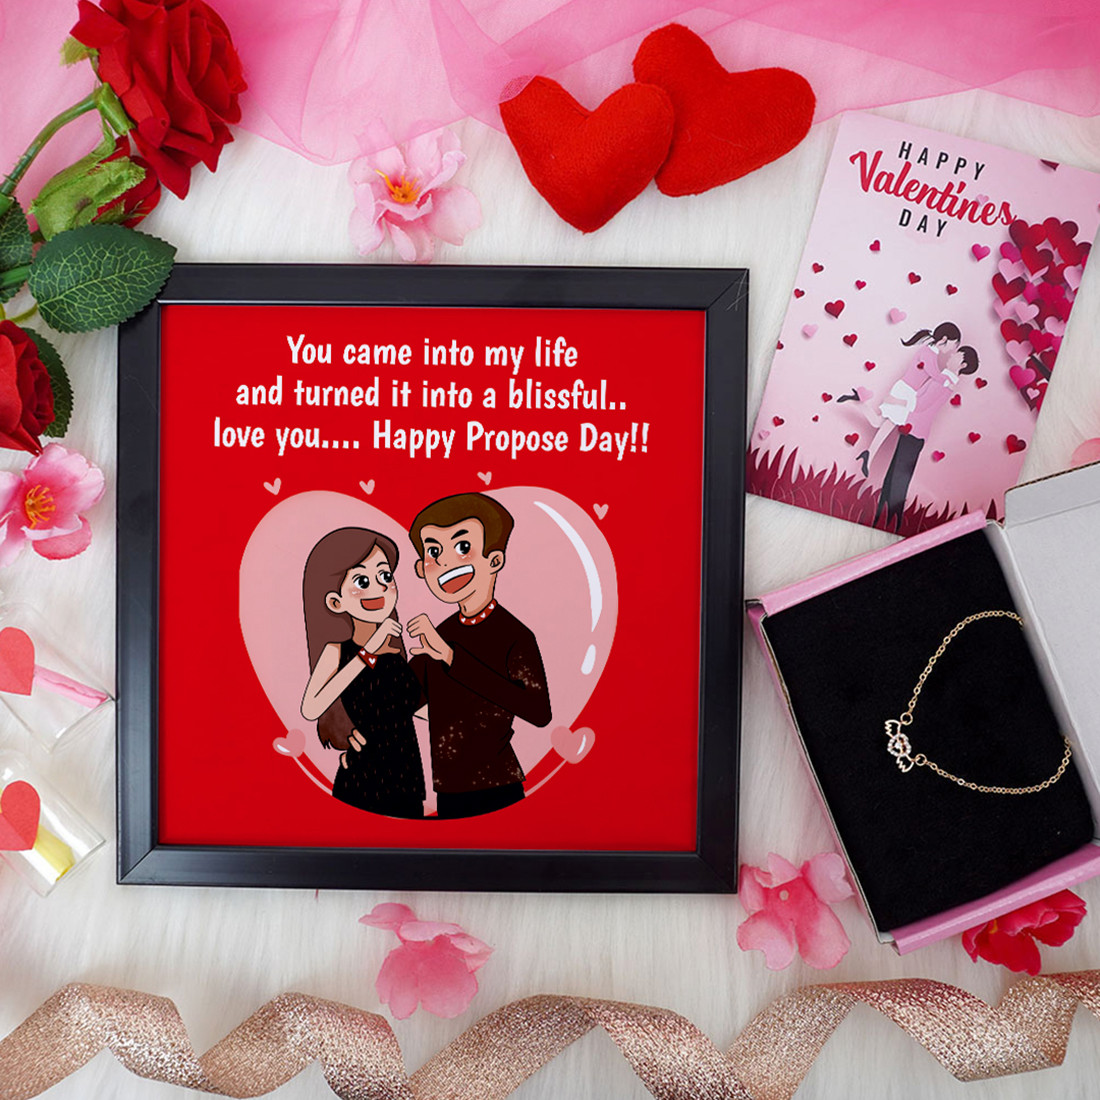 Happy Propose Day!! Valentine Gift Set | Valentine's Day Gifts for Girlfriend | Valentine Gift for Wife | Women's Pendant/Pendant for Girl/Greeting Card | Photo Frame (8x8 Inches)